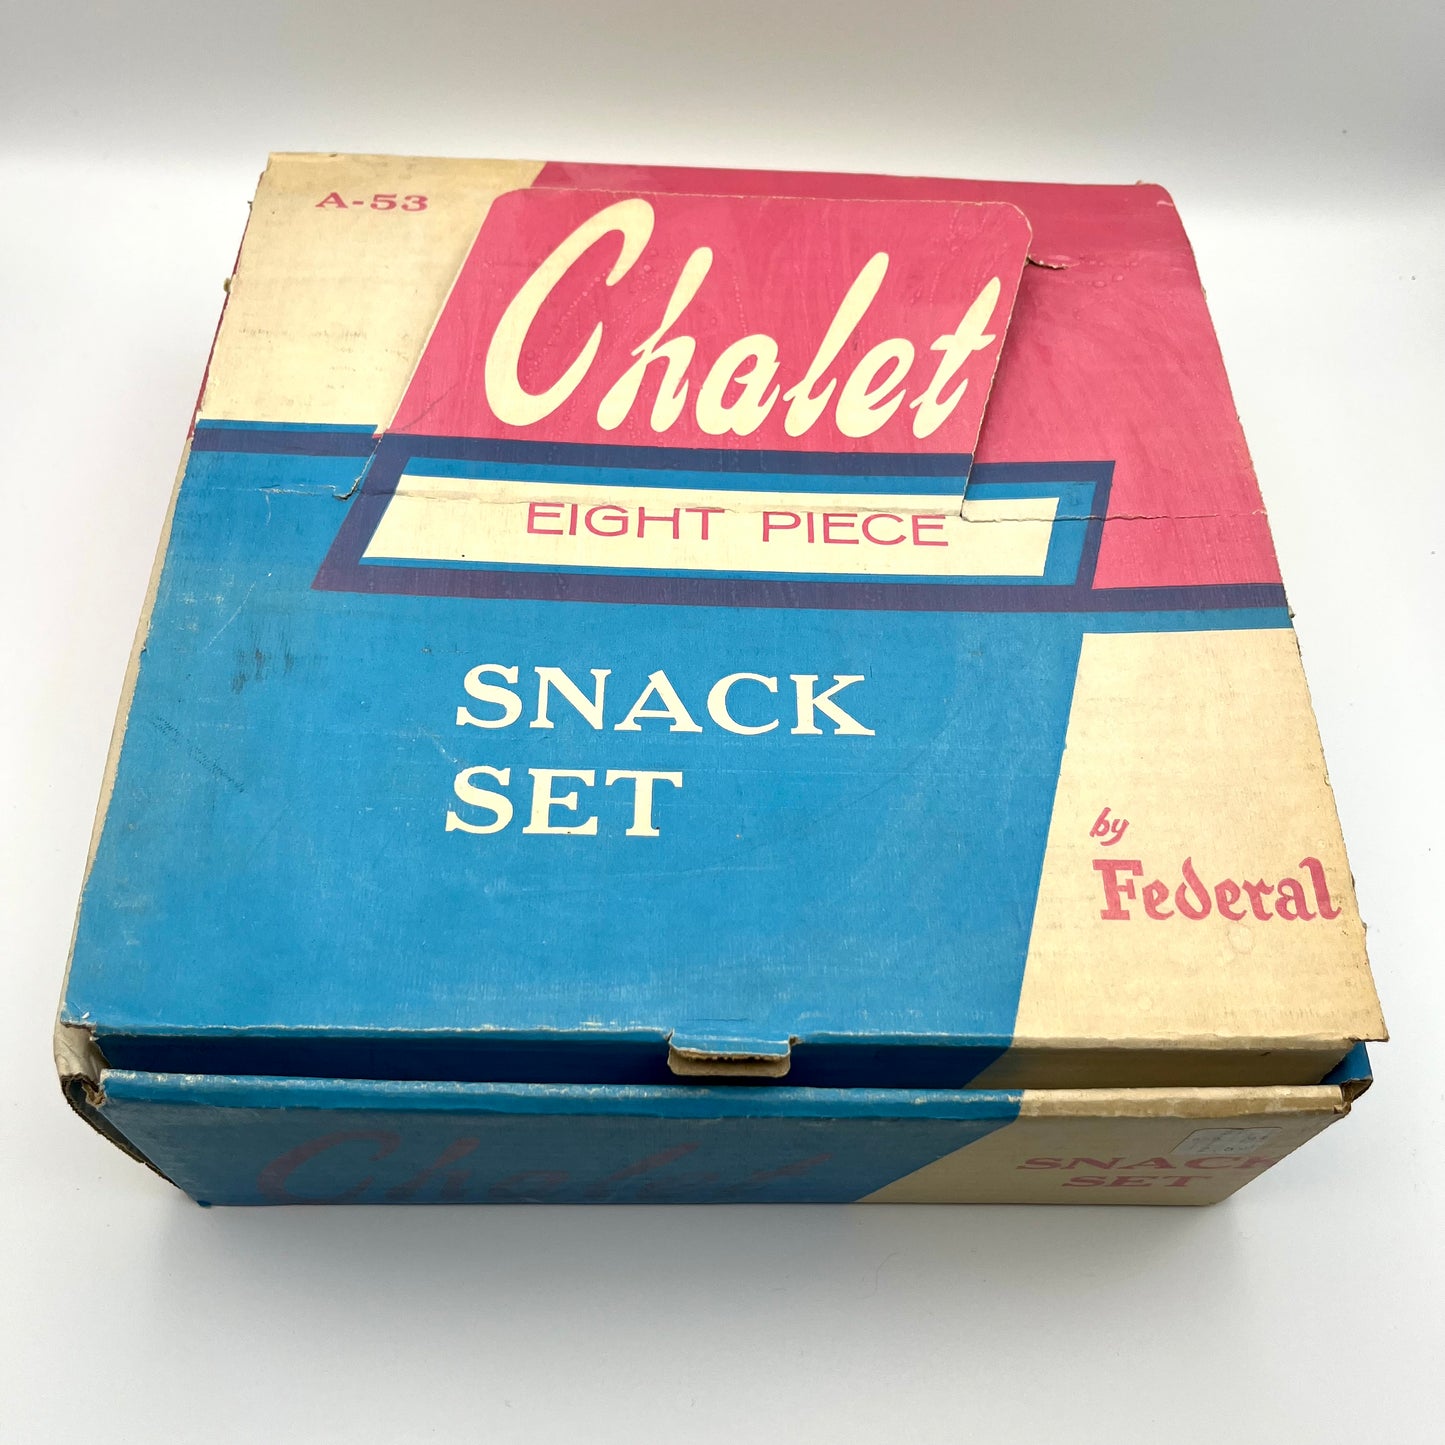 1950s Federal Glass, Chalet Snack Set in Original Box